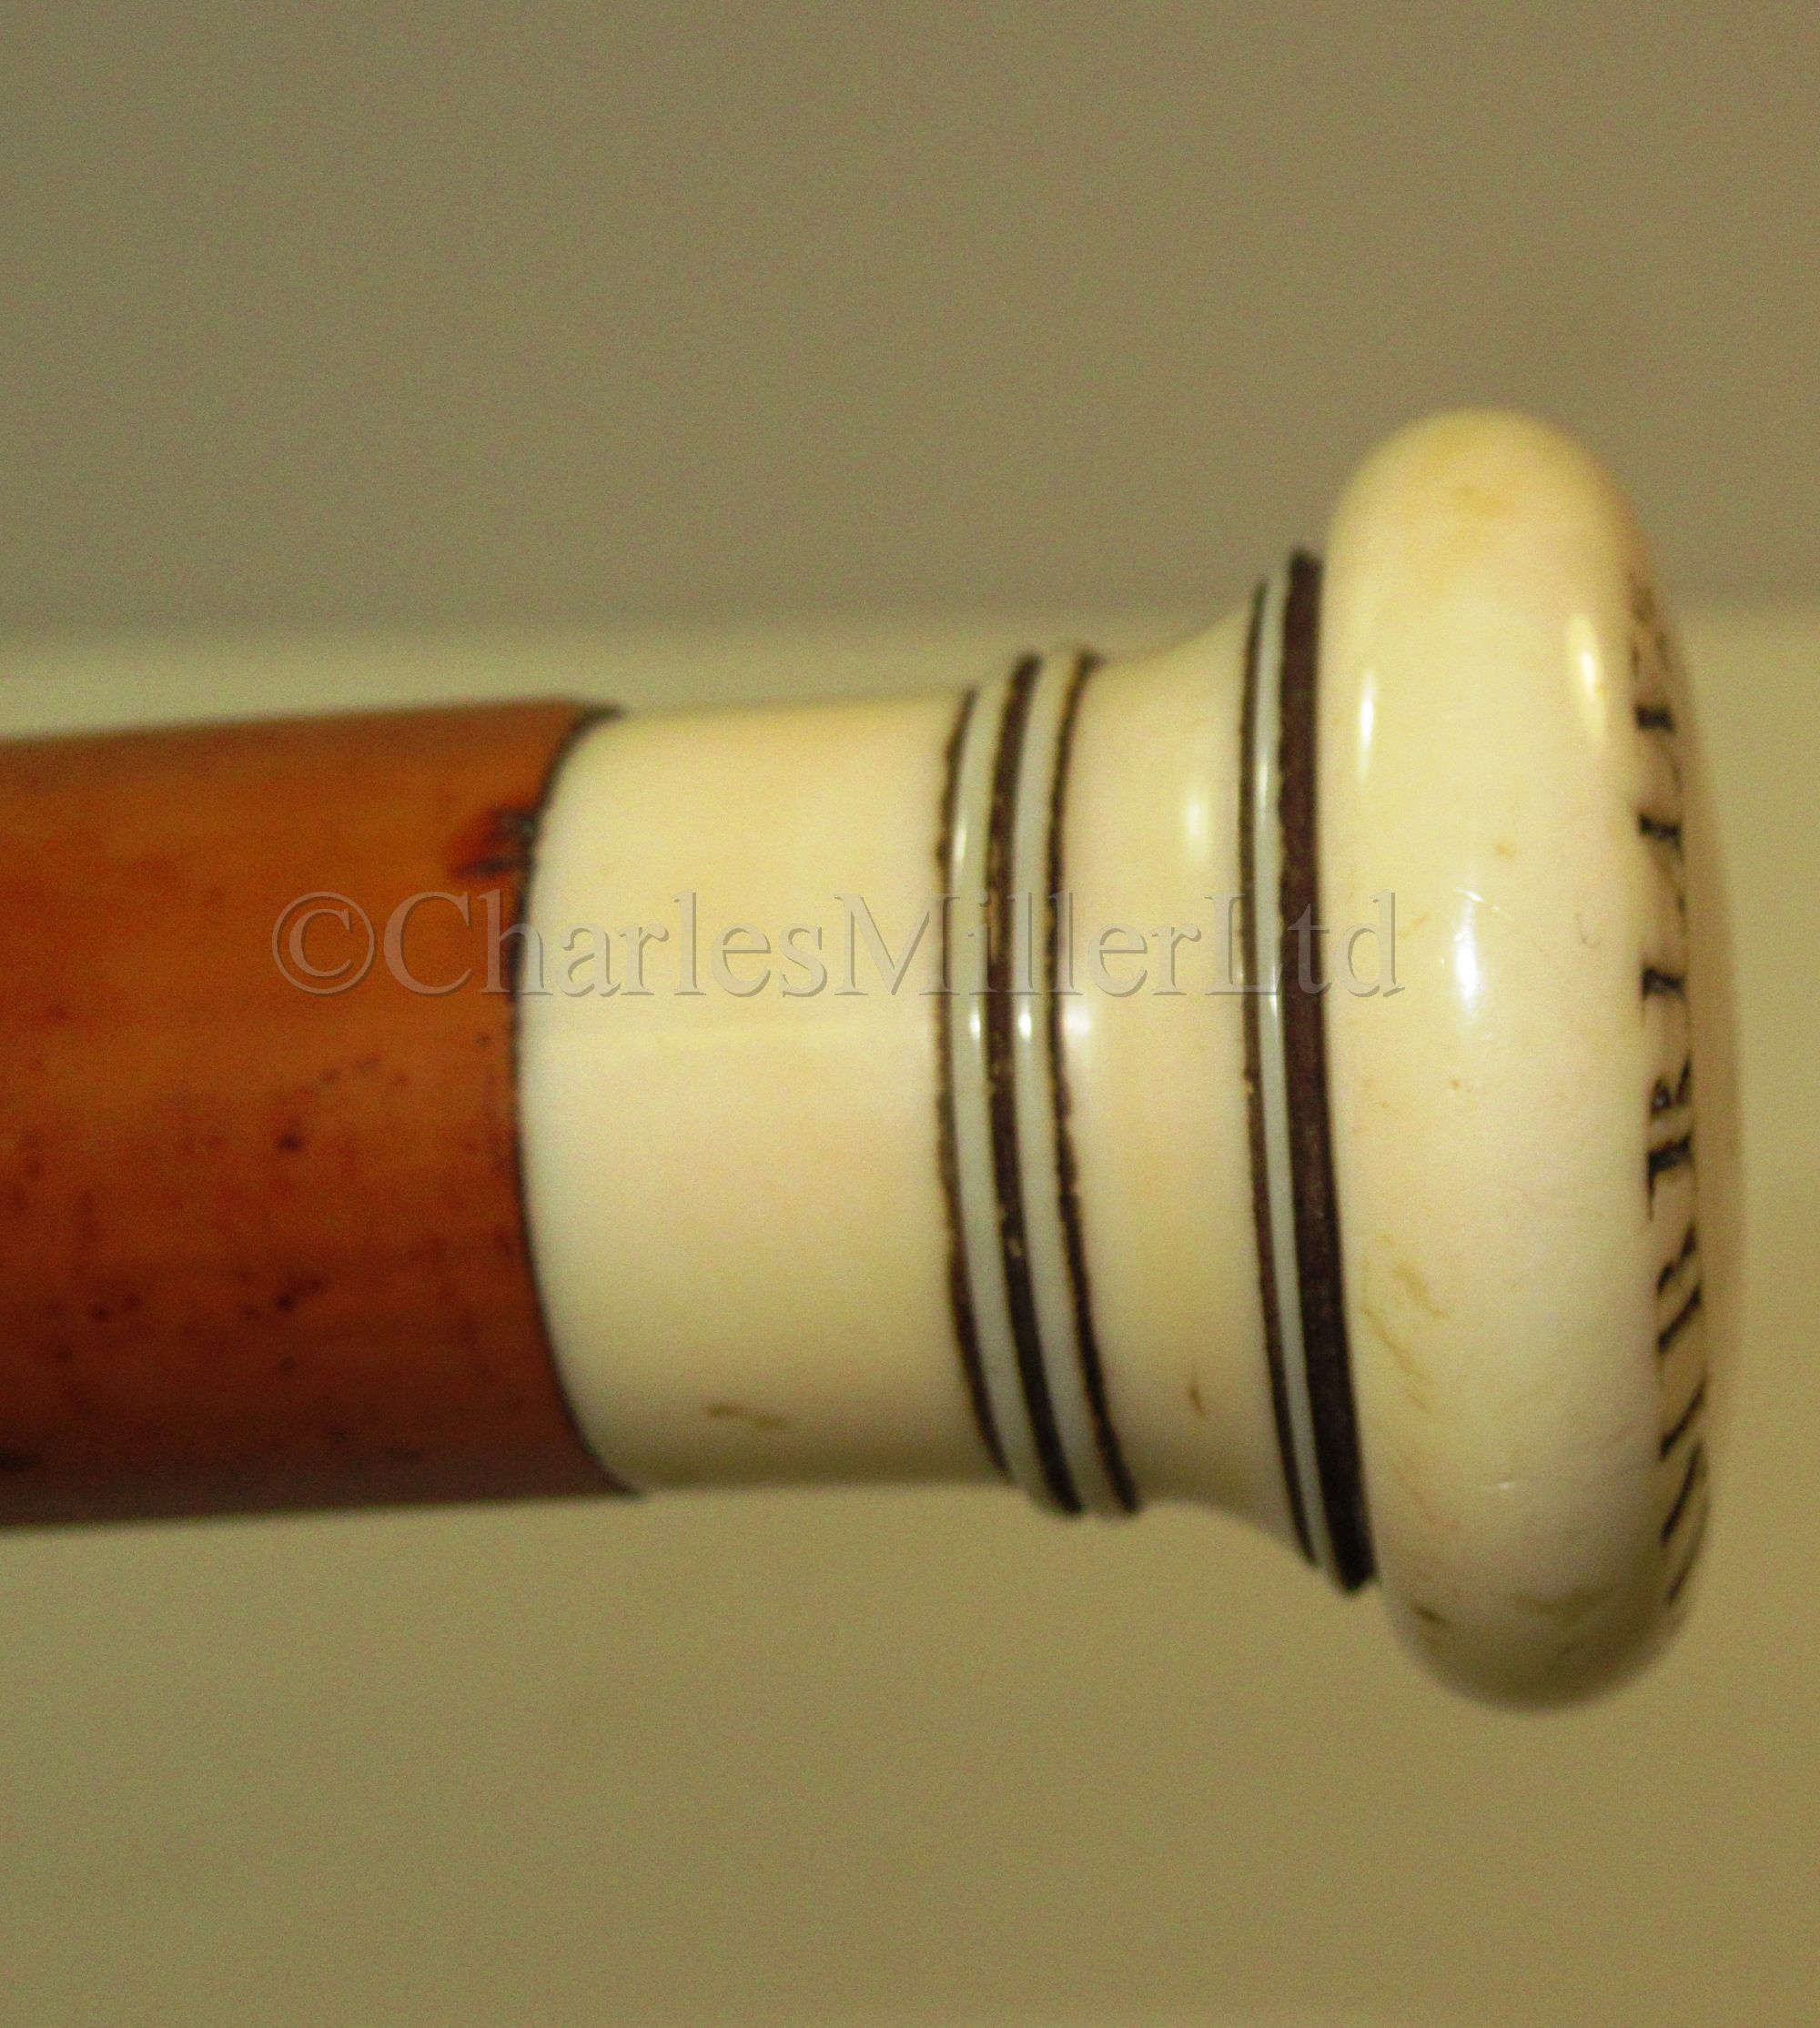 Ø A 19TH CENTURY MALACCA AND MARINE IVORY WALKING STICK COMMEMORATING THE WHALER CAMBRIAN - Image 4 of 4